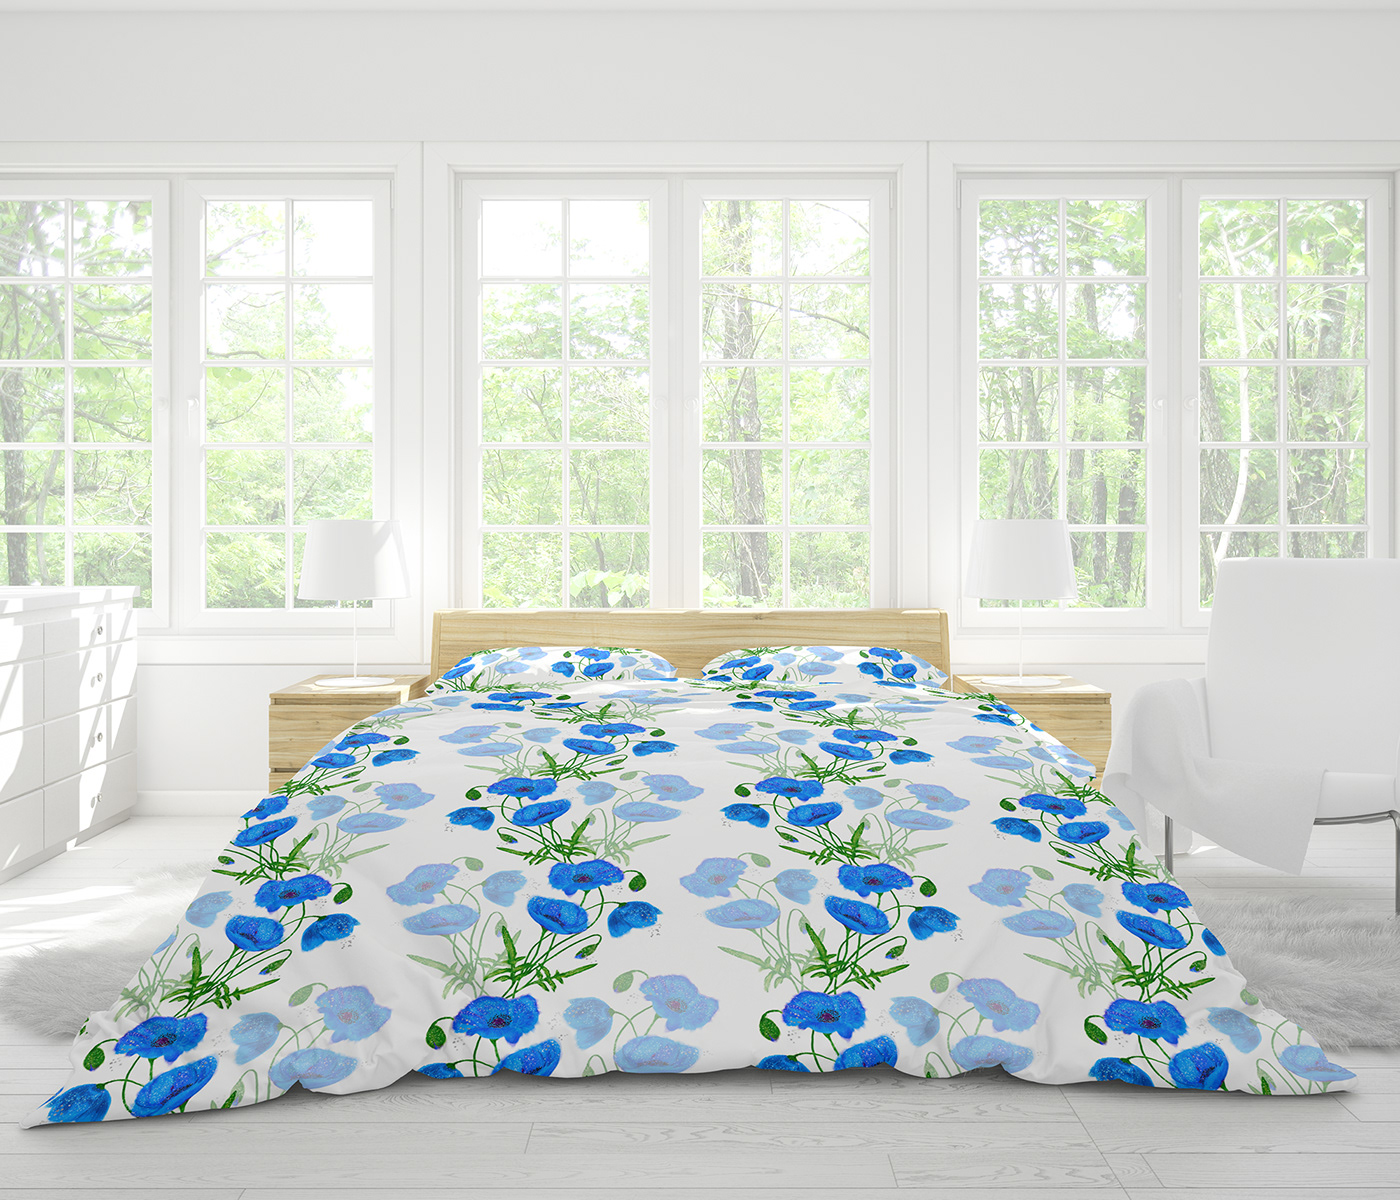 bed design poppies flowers poppies pattern design  print watercolour sketch blue poppies poppies watercolor